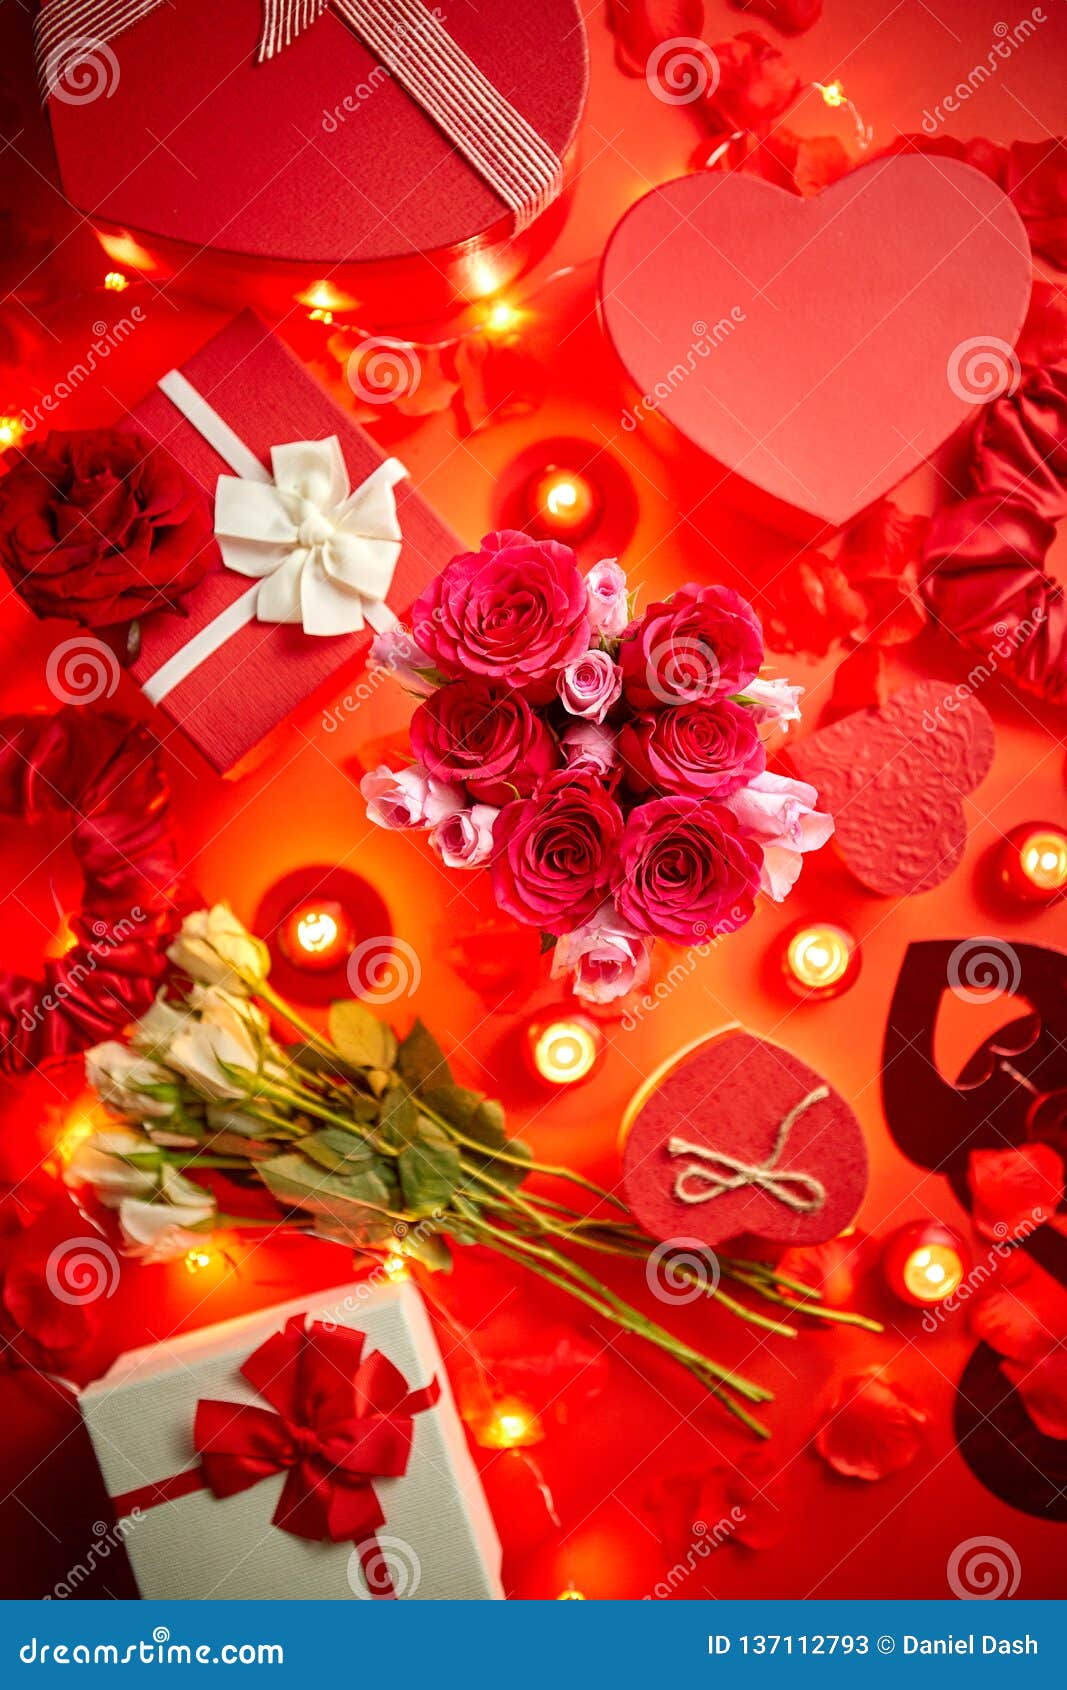 Valentines Day Romantic Decoration With Roses, Boxed Gifts